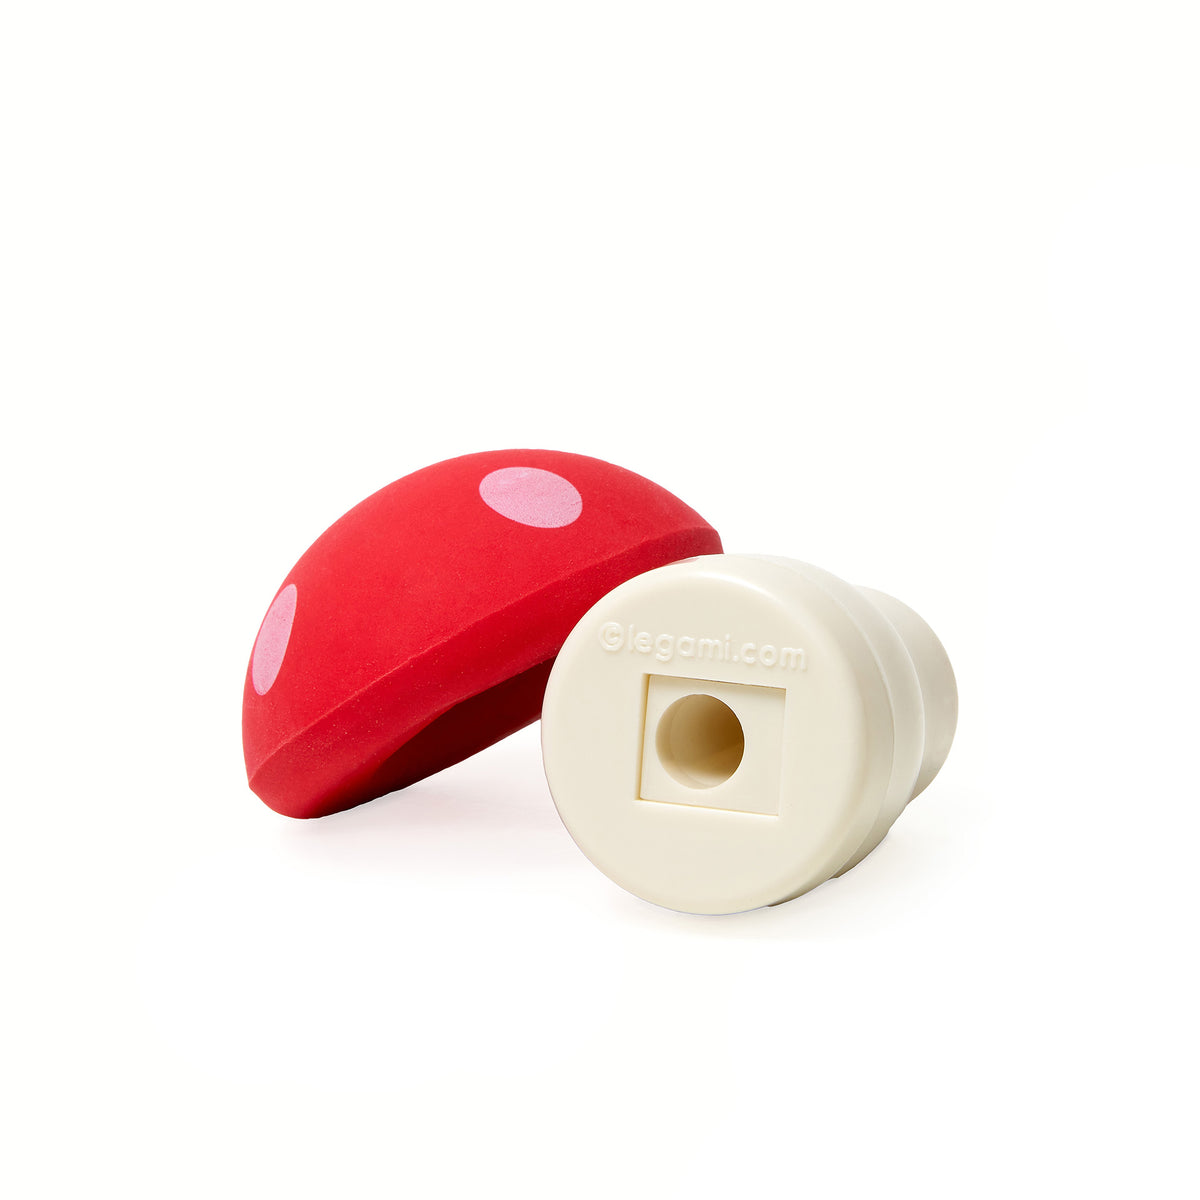 An image showing the eraser toadstool top and the stalk sharpener on this 2 in 1 stationery item.